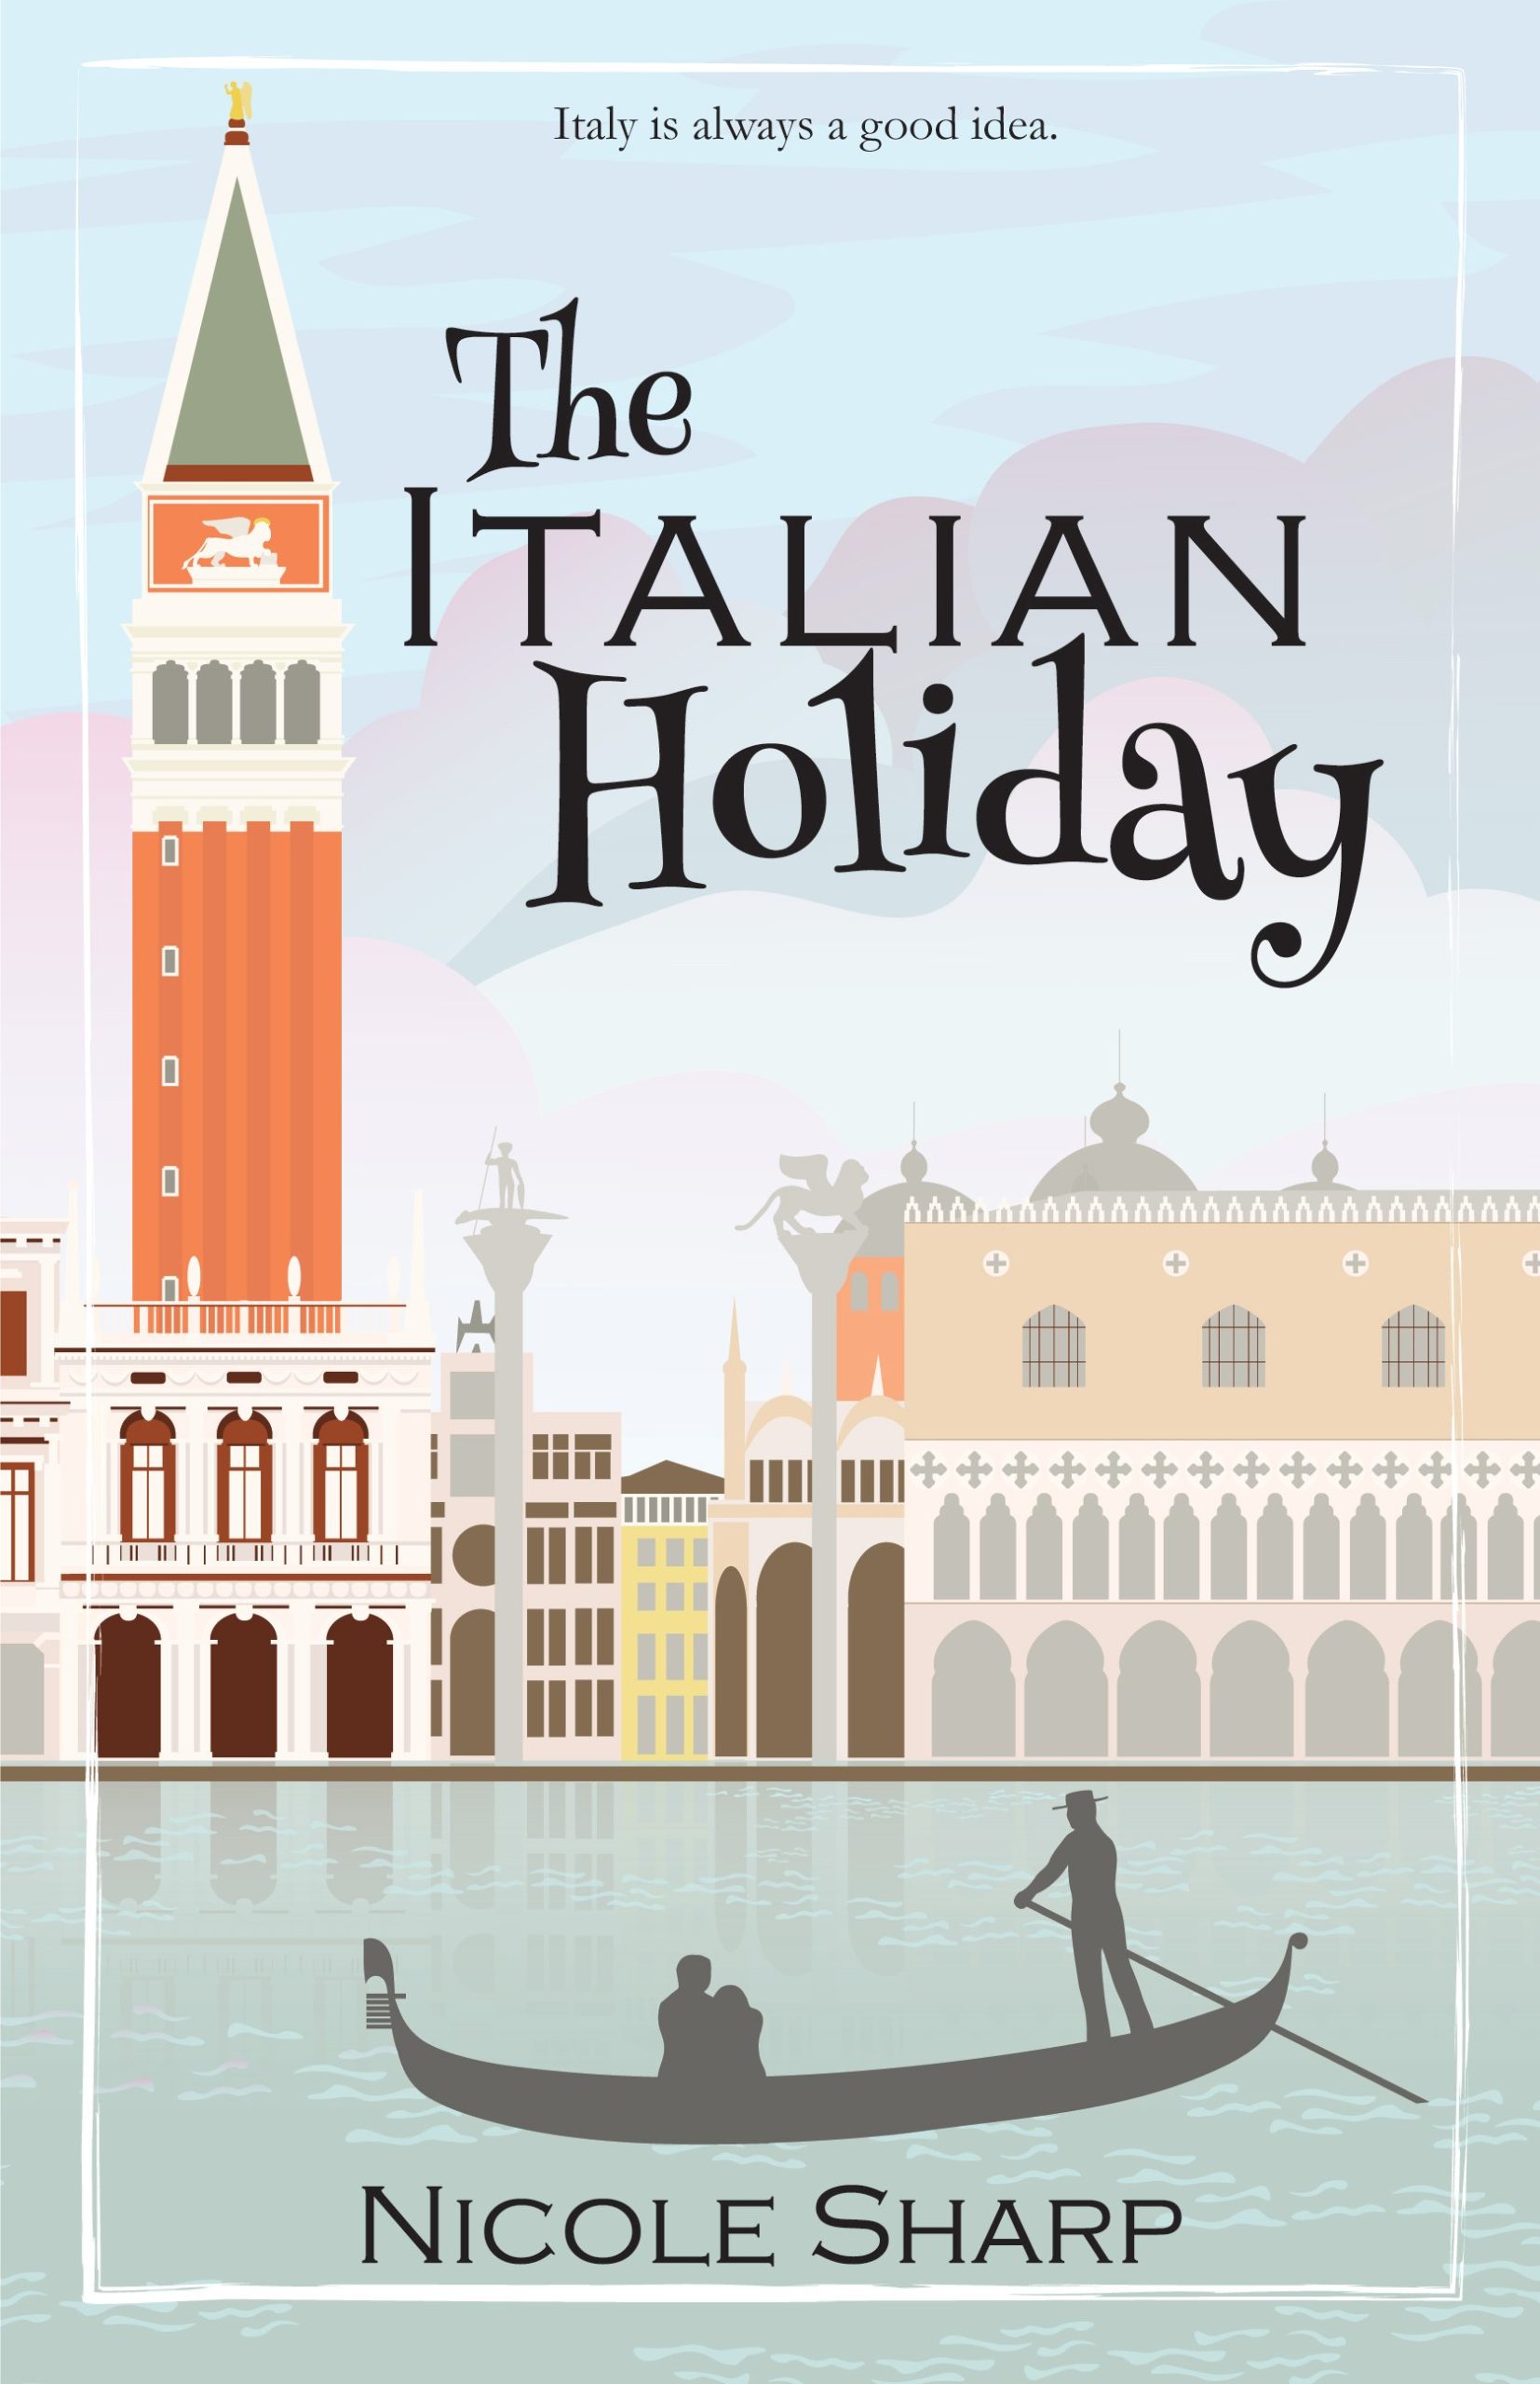 The Italian Holiday by Nicole Sharp PDF Download